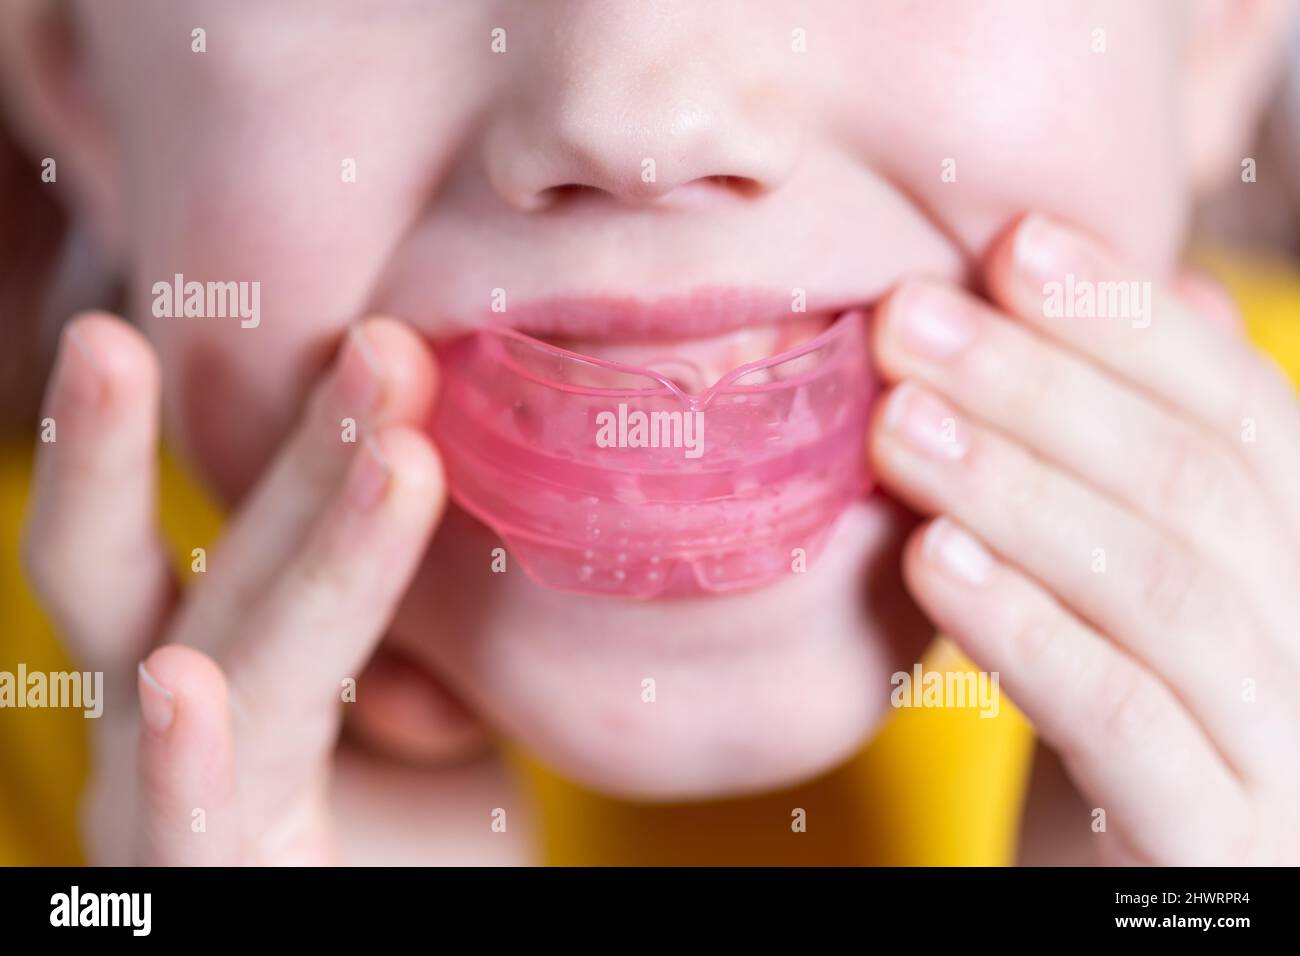 Six-year old caucasian girl shows myofunctional trainer. dental tariner is made to help equalize growing teeth and correct bite, develop mouth breathi Stock Photo